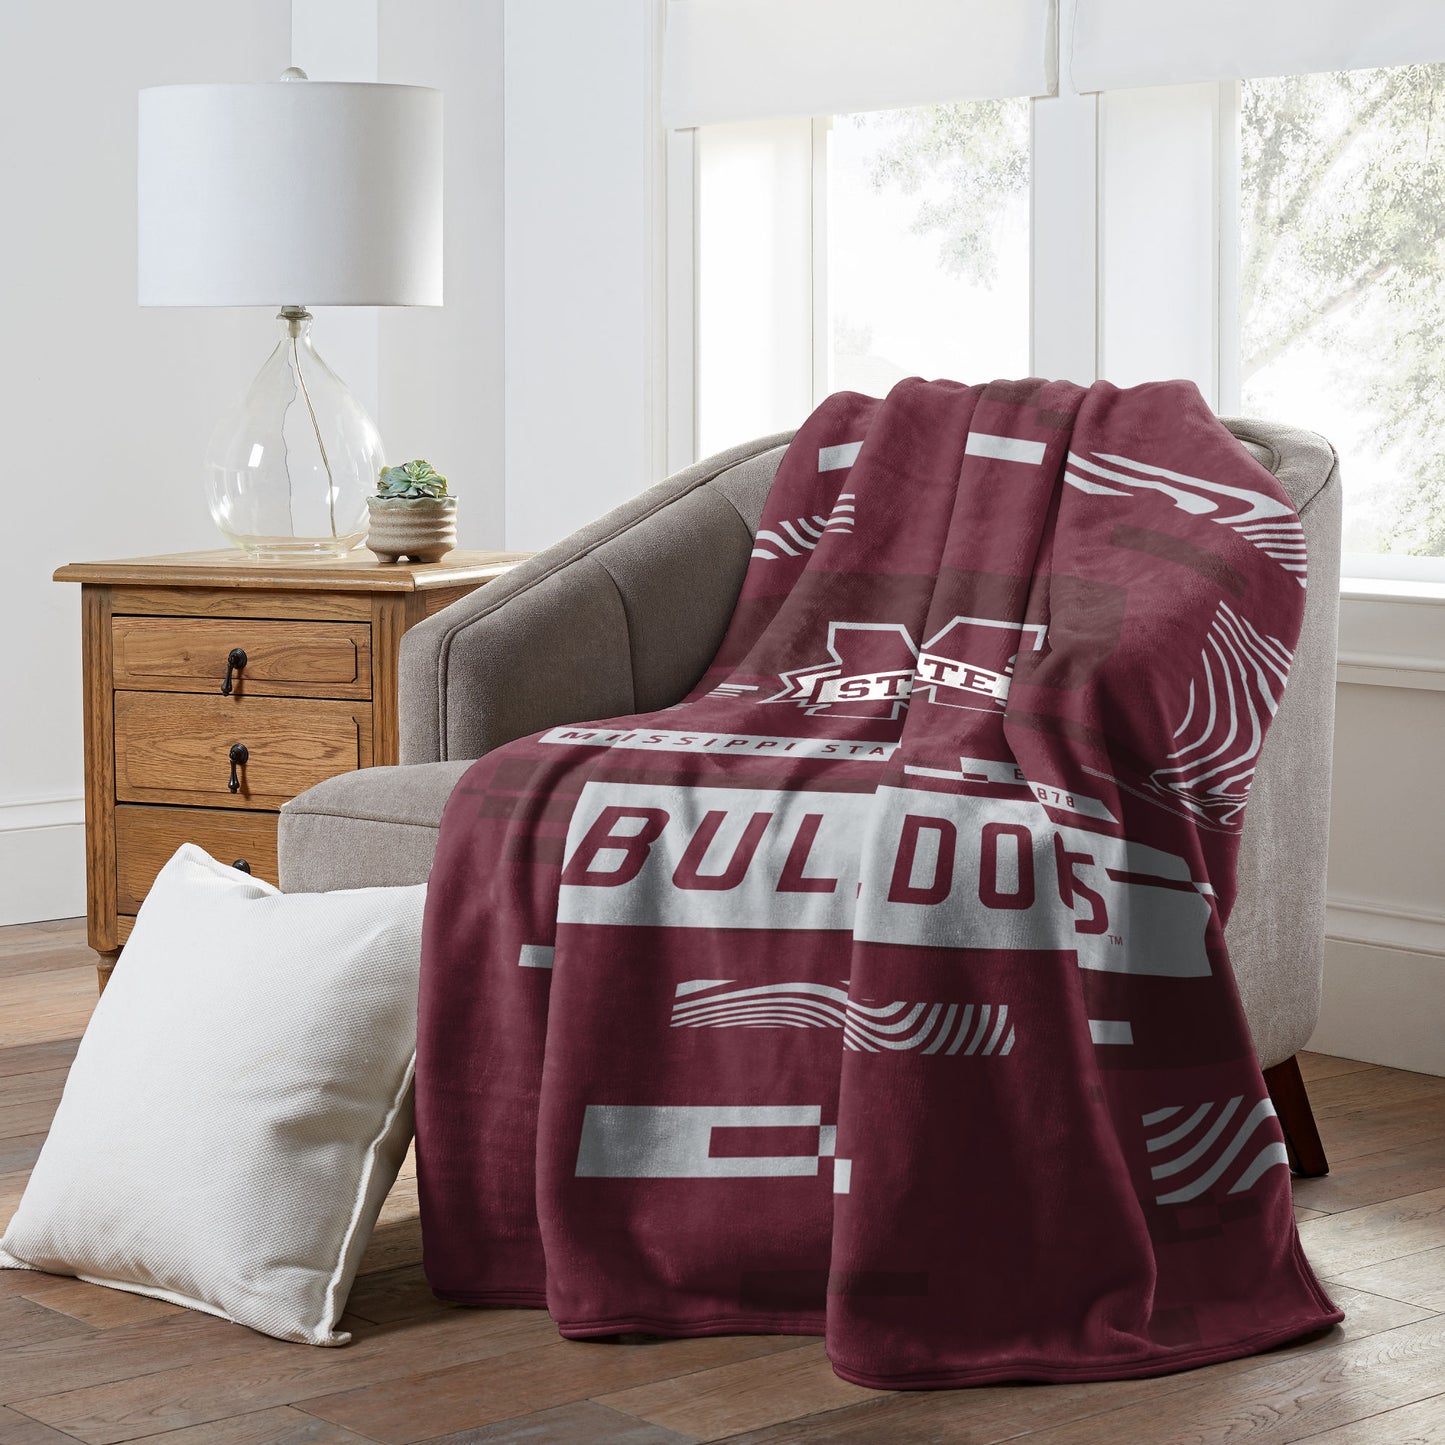 MISSISSIPPI STATE OFFICIAL NCAA "Digitize" Raschel Throw Blanket, 60" x 80"